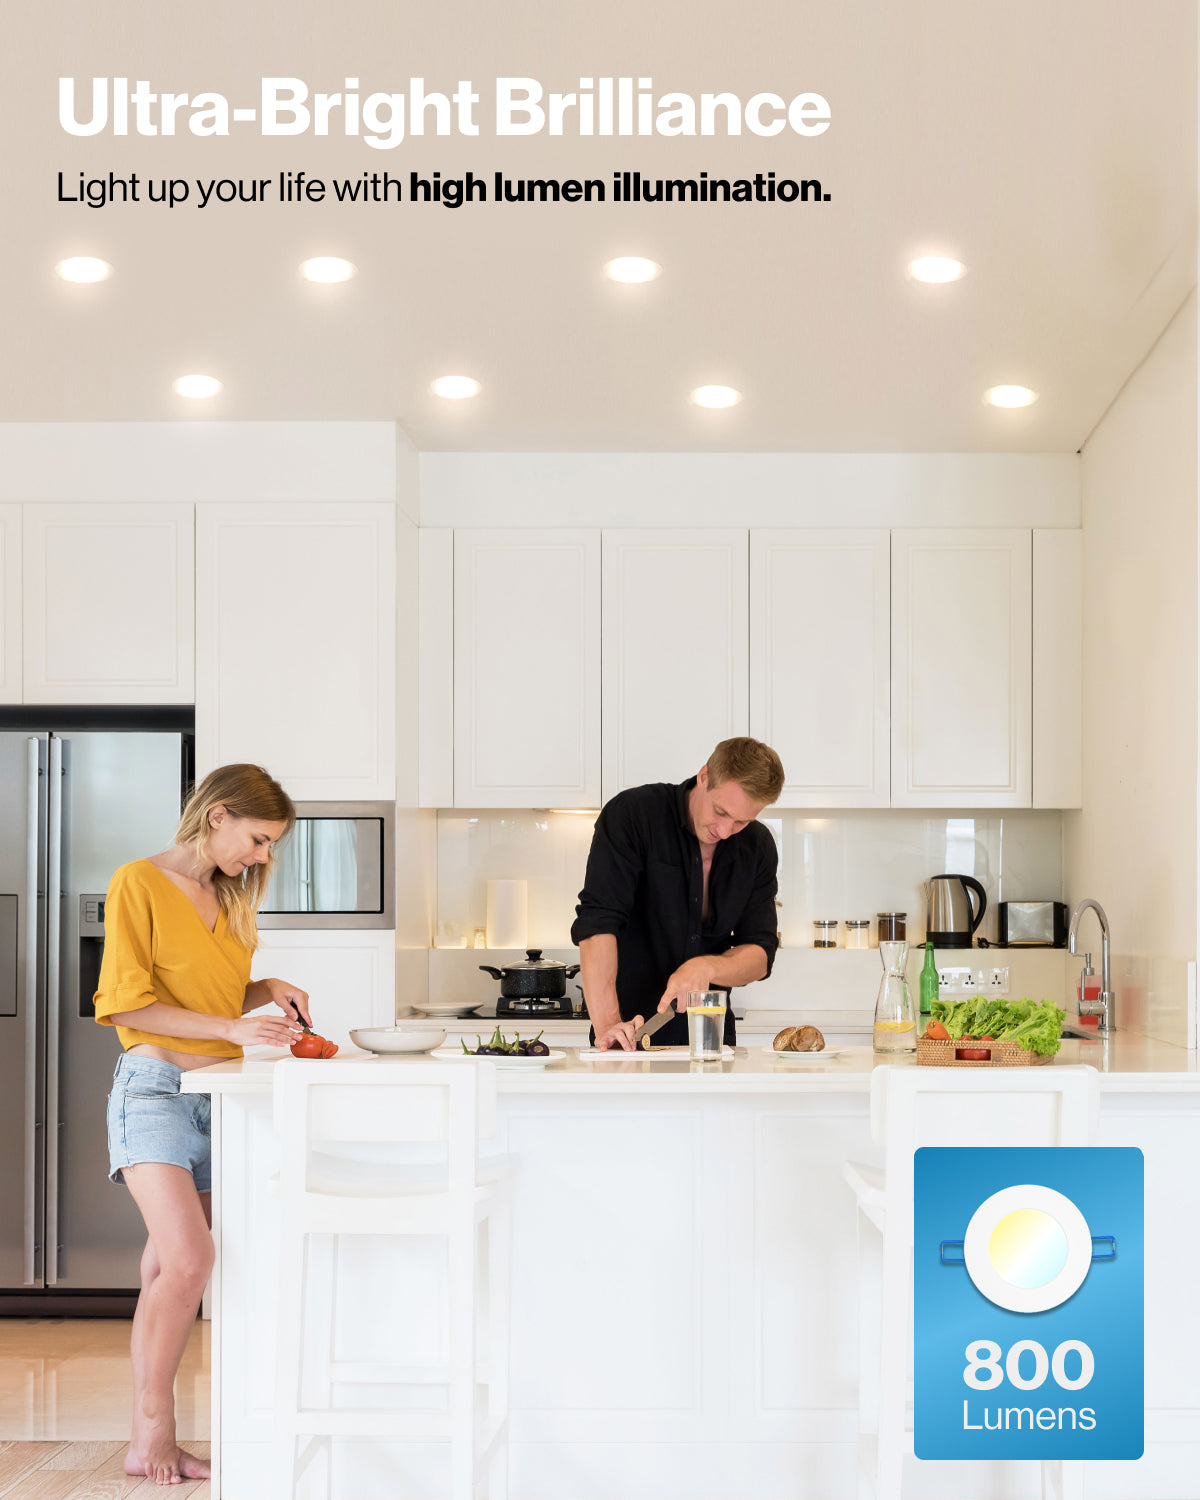 Brighten up your indoor space with vibrant lighting, crisp radiance, and an illuminated experience.